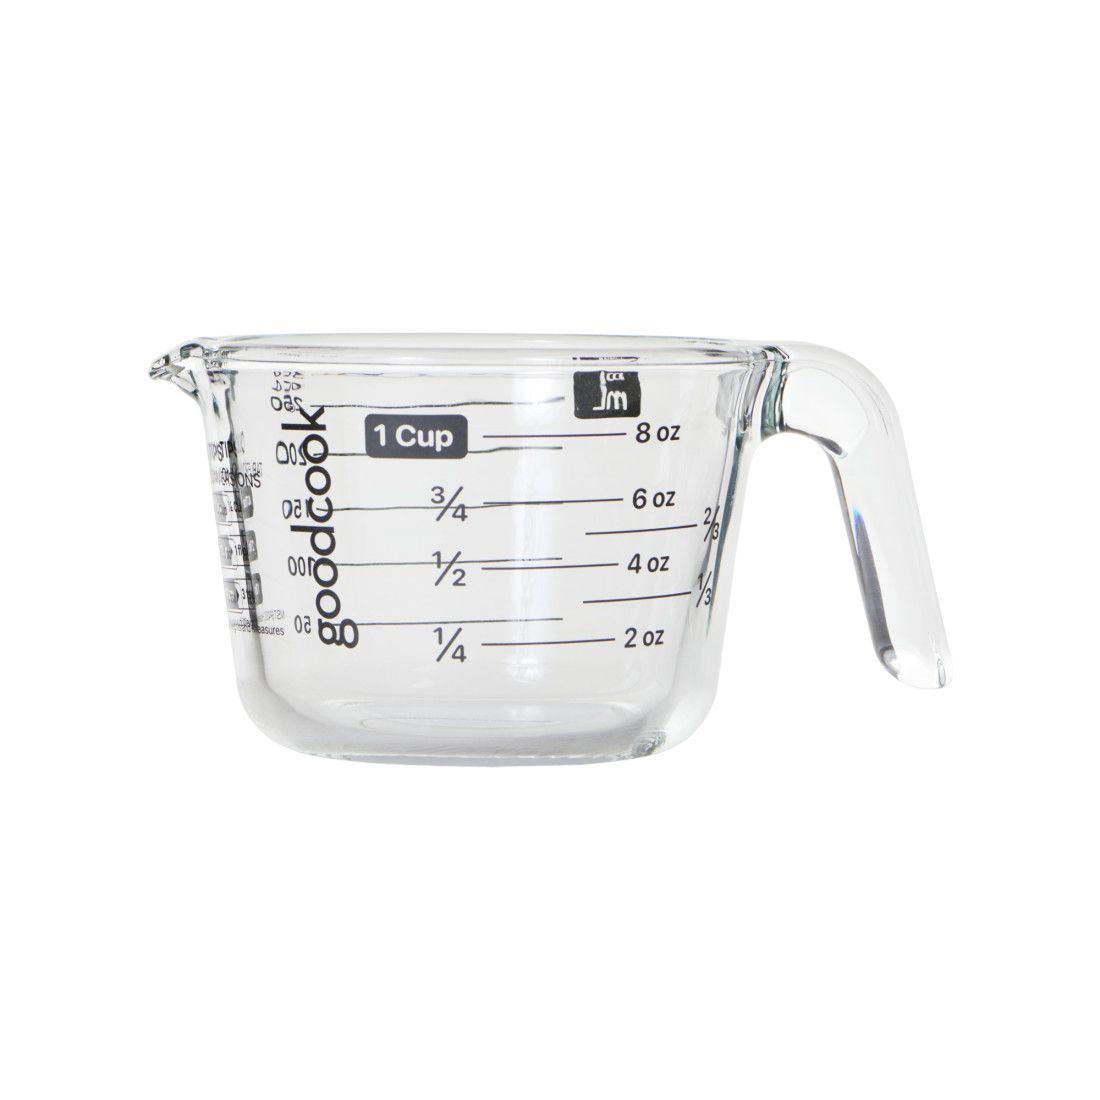 Good Cook 20344 Measuring Cup, 1/4 Cup, Assorted Colors – Toolbox